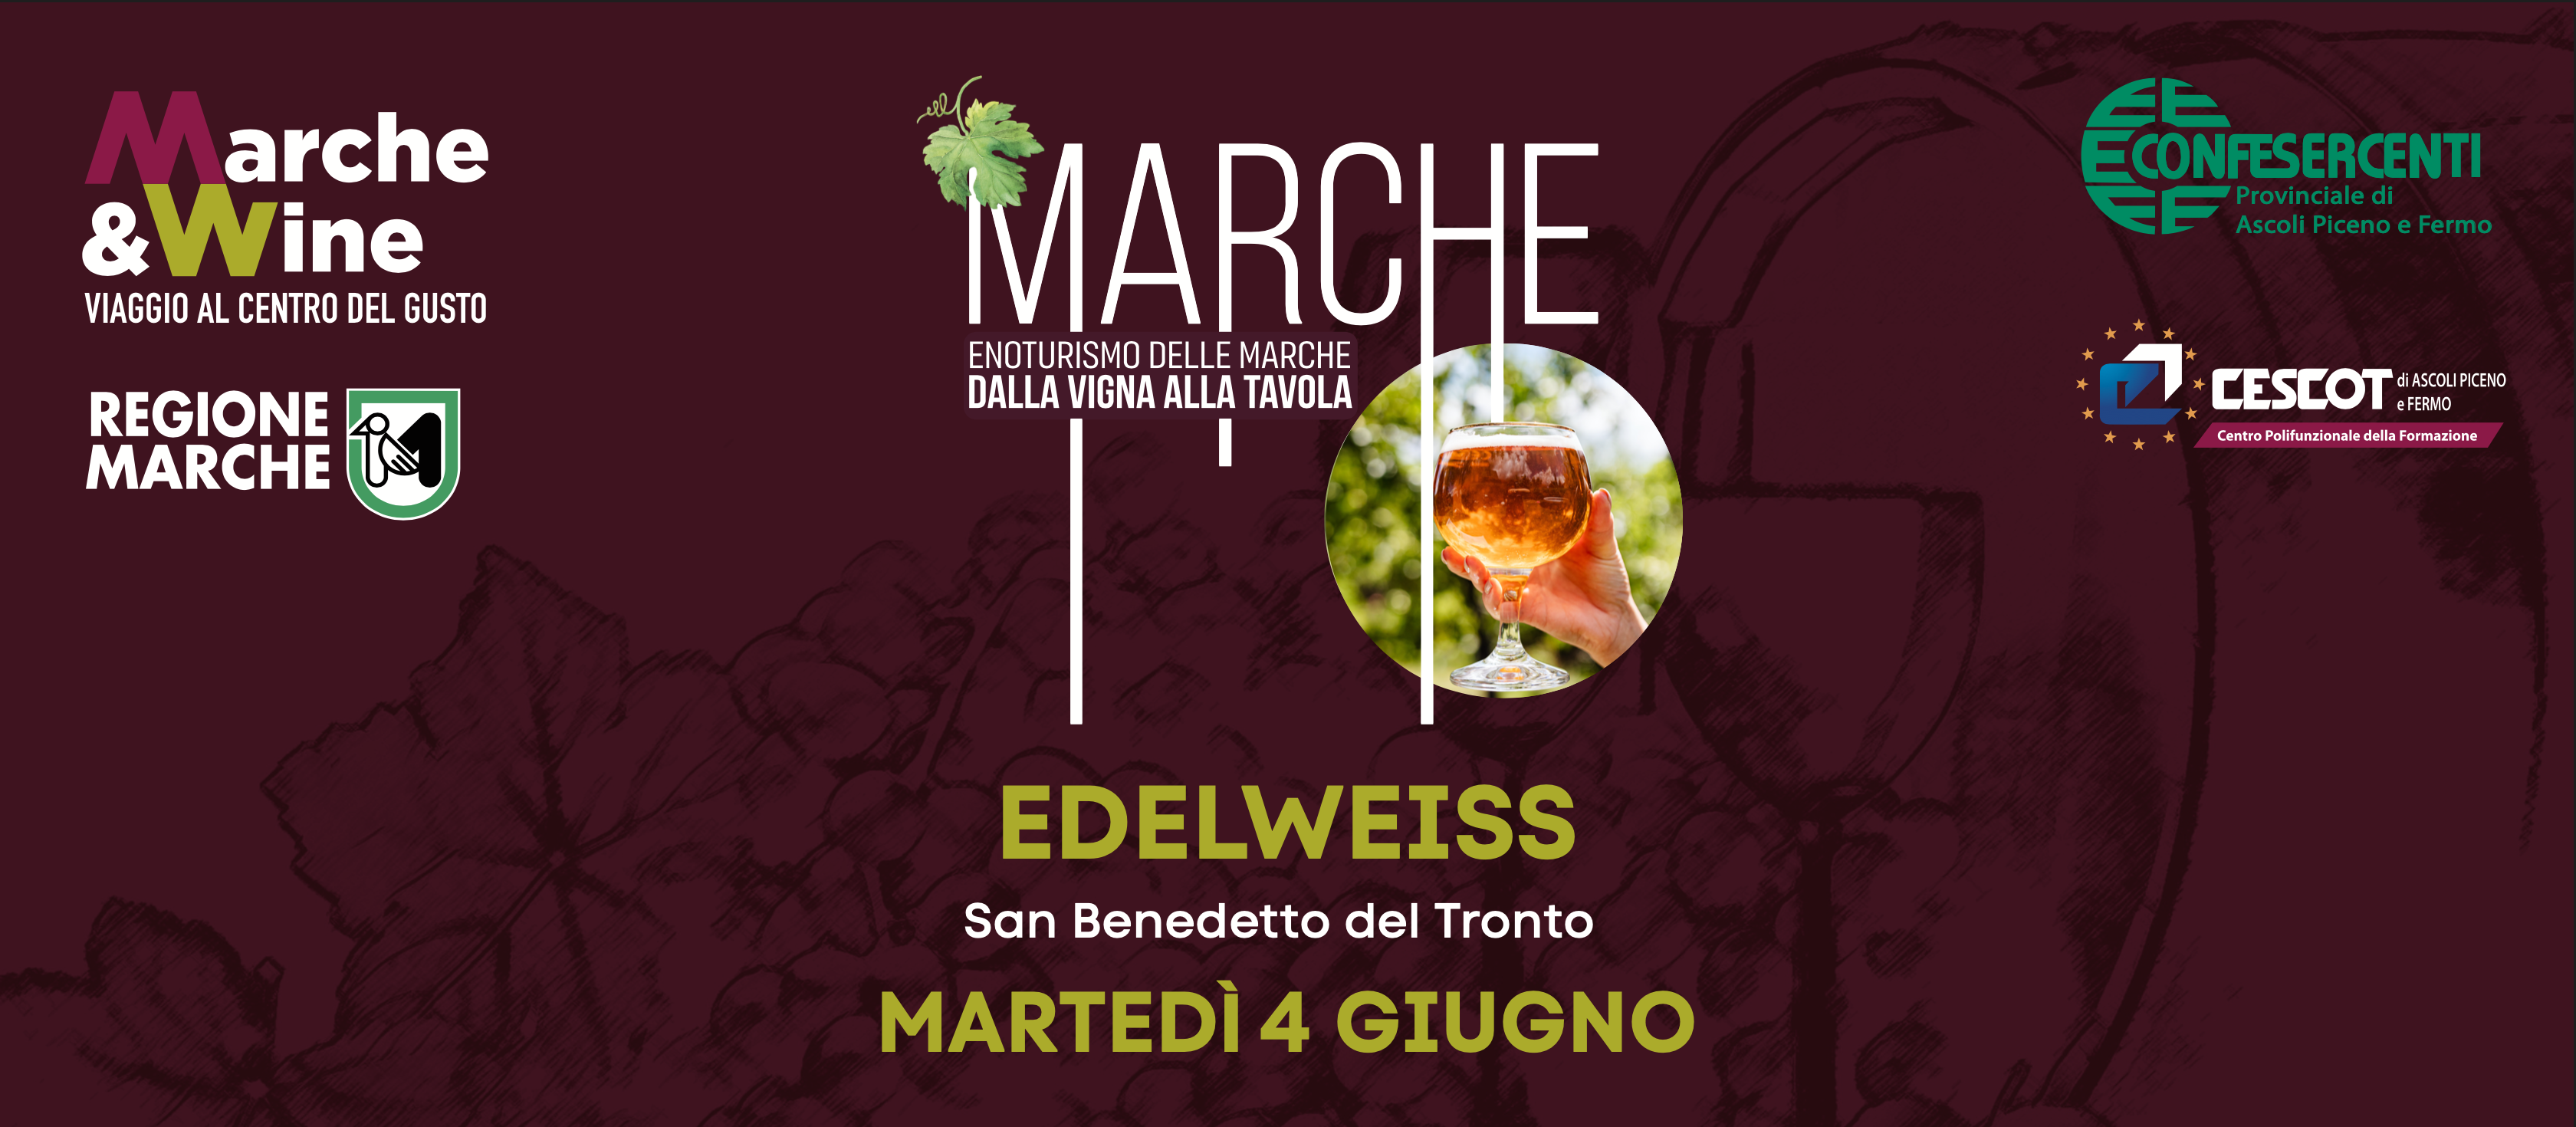 Marche & Wine all'Edelweiss